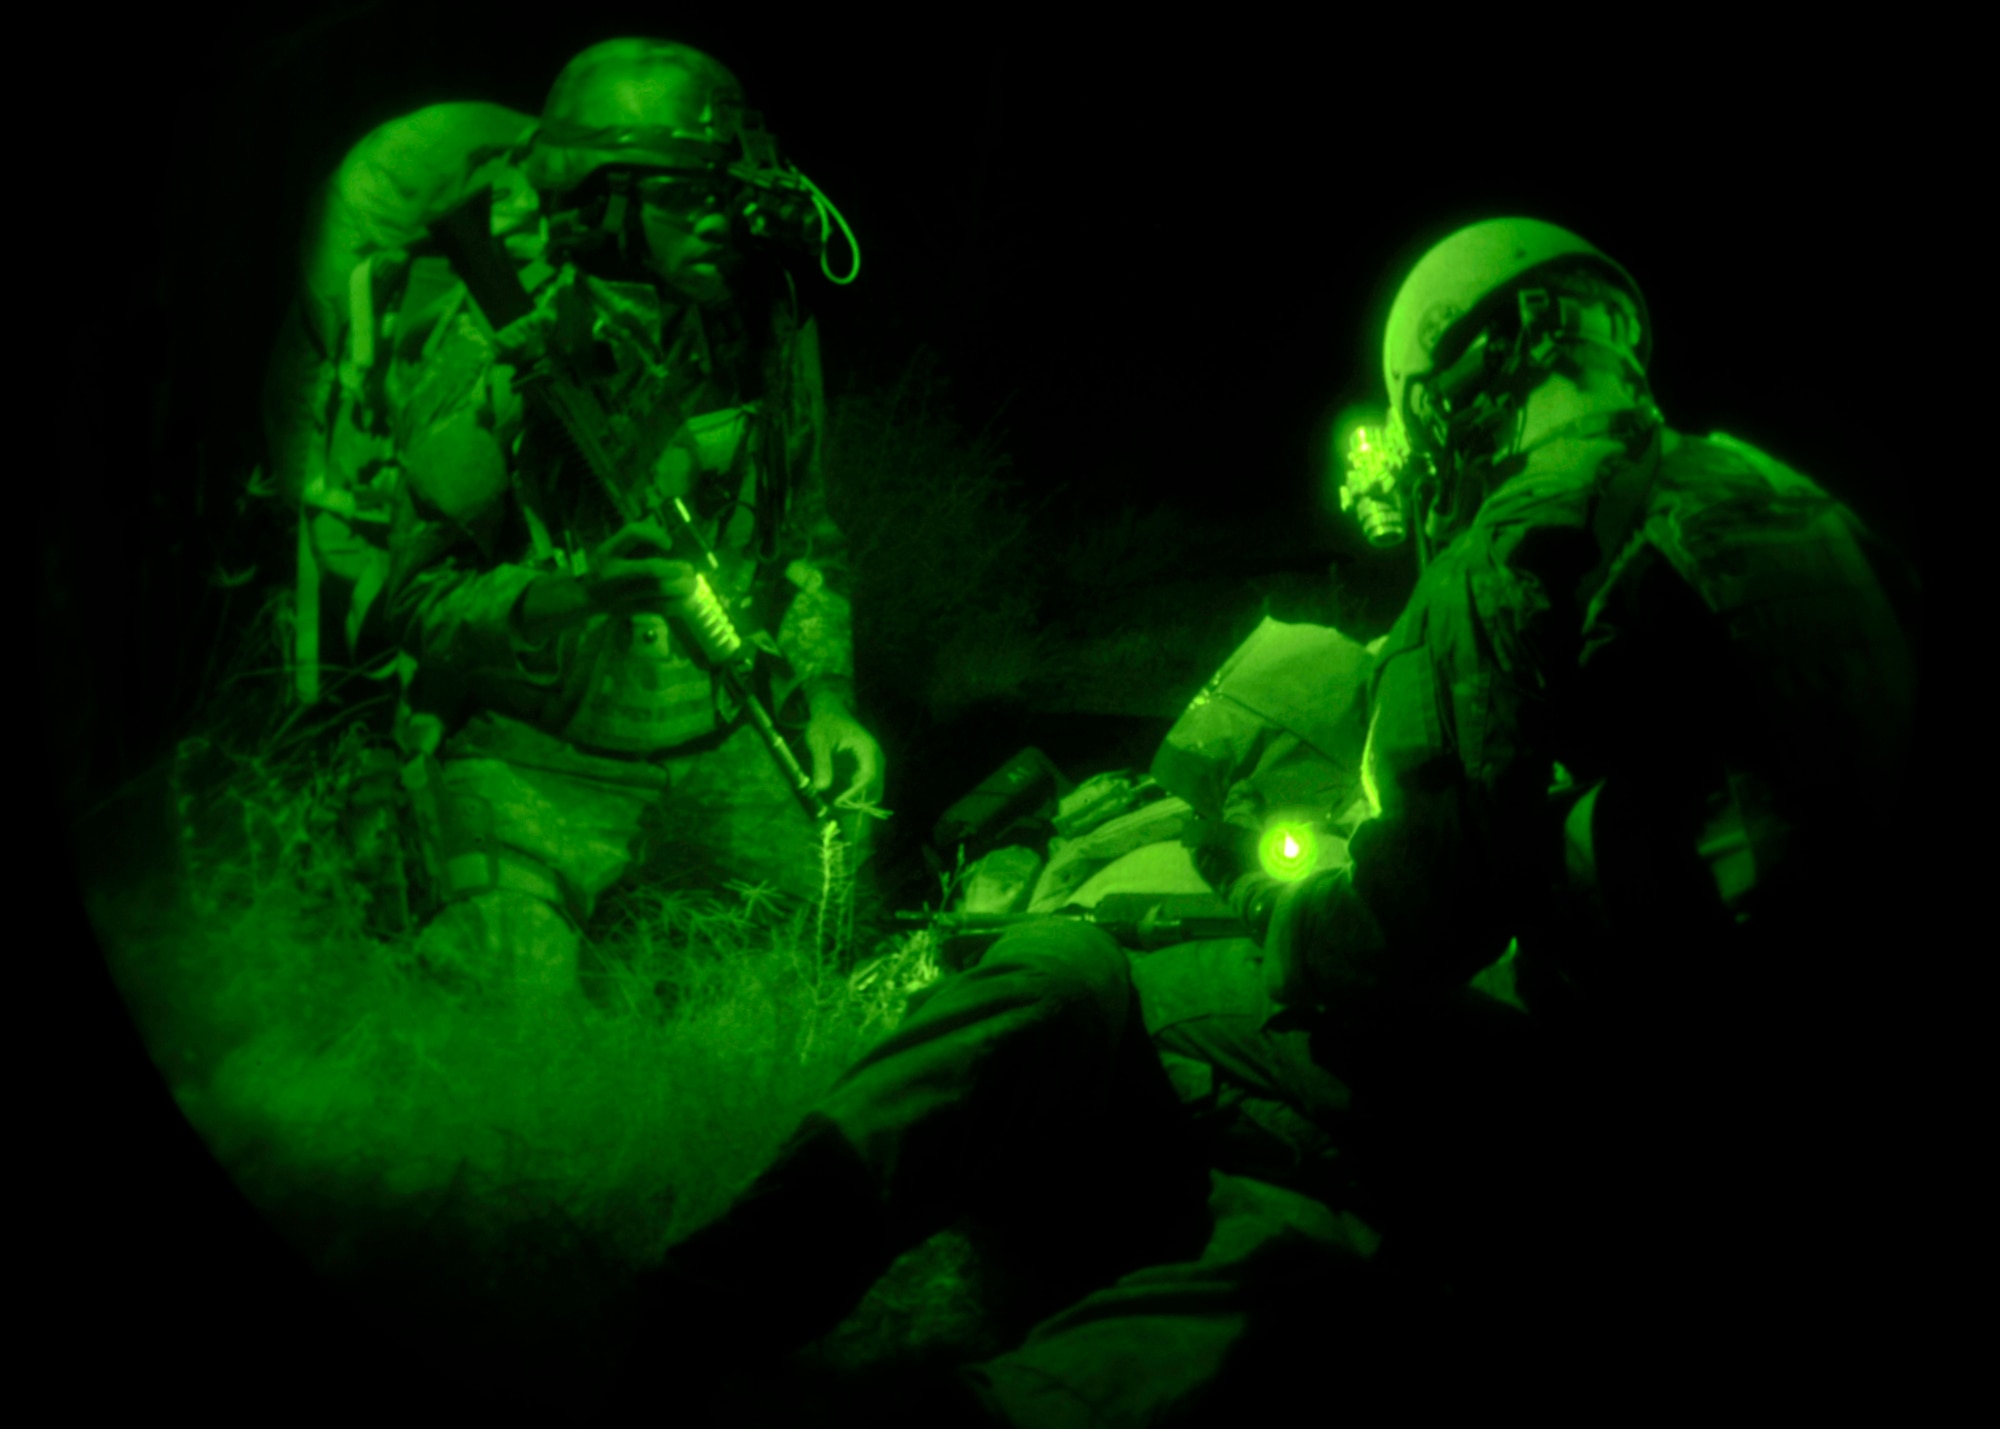 U.S. soldiers with the 3rd Special Forces Group, perform field medical support on a fellow soldier during a training exercise at Melrose Range, N.M., Sept. 20, 2011. The training exercise took place over two days and consisted of several different scenarios, developed to train this elite force. (U.S. Air Force photo by Airman 1st Class Ericka Engblom/ Released) 